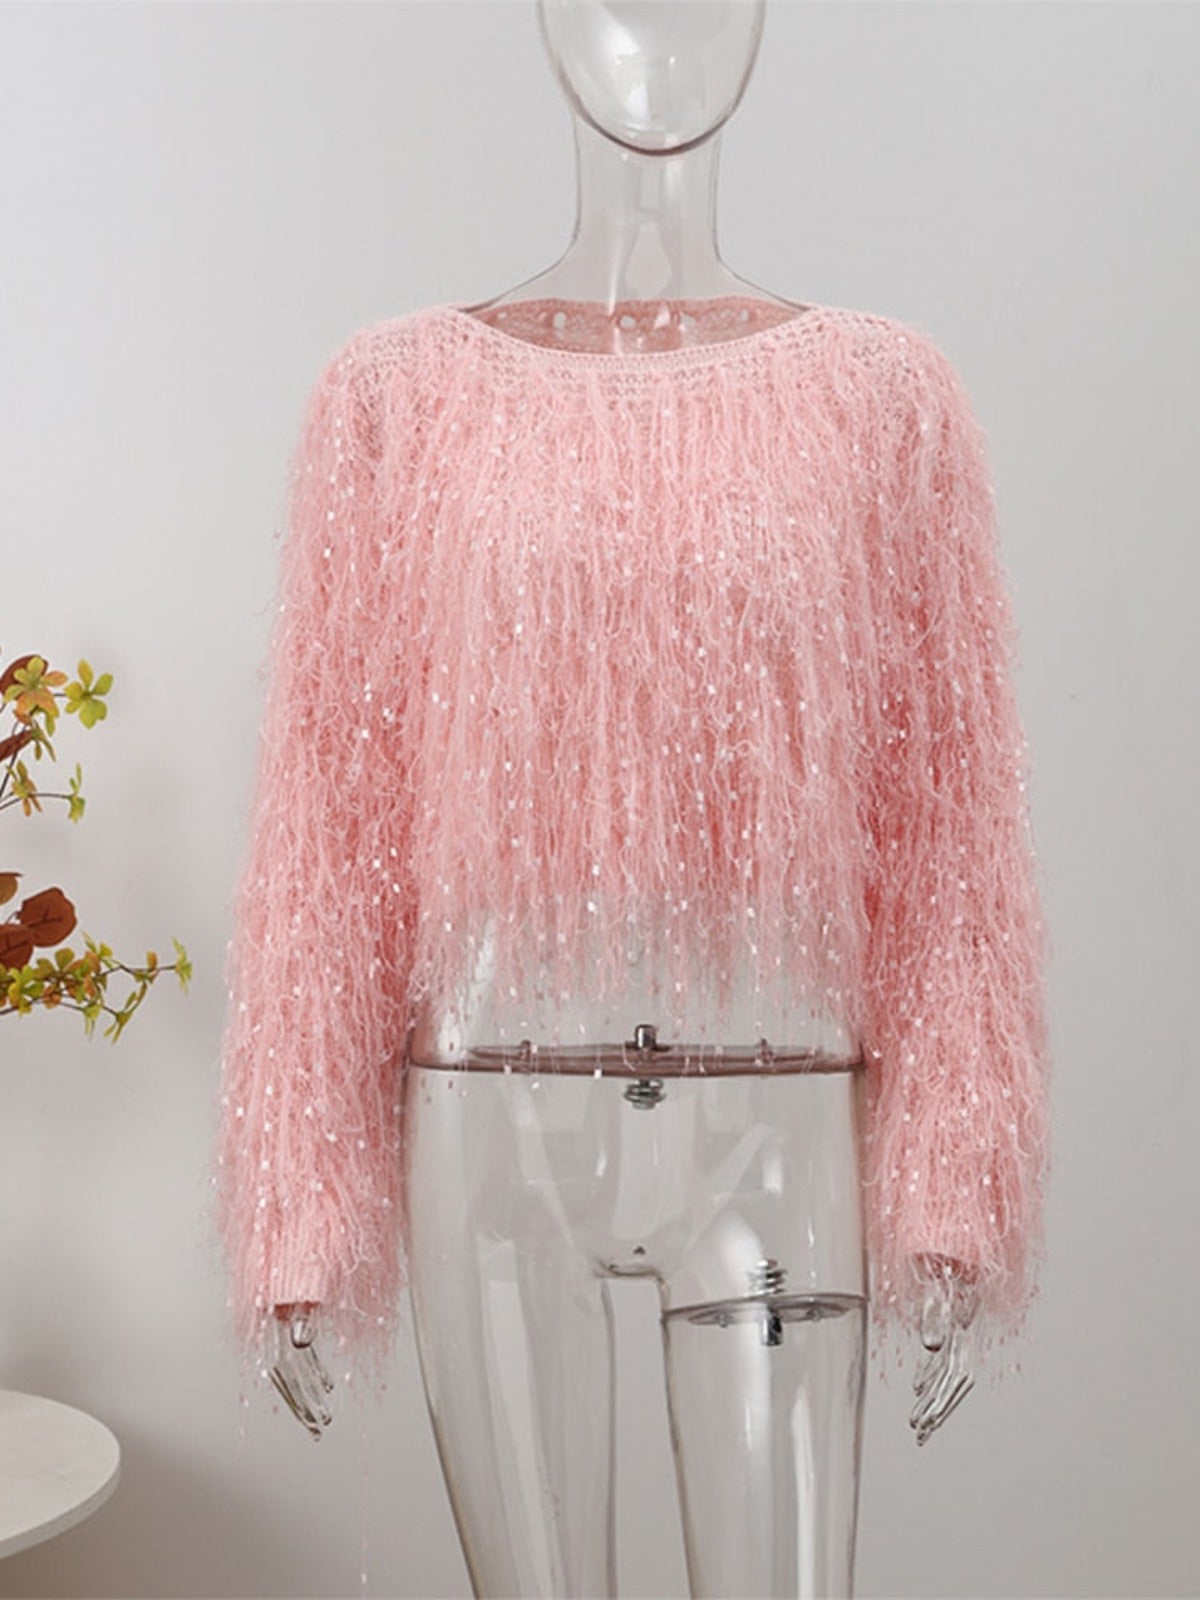 Shaggy Knitted Sparkly Jumper - Festigal